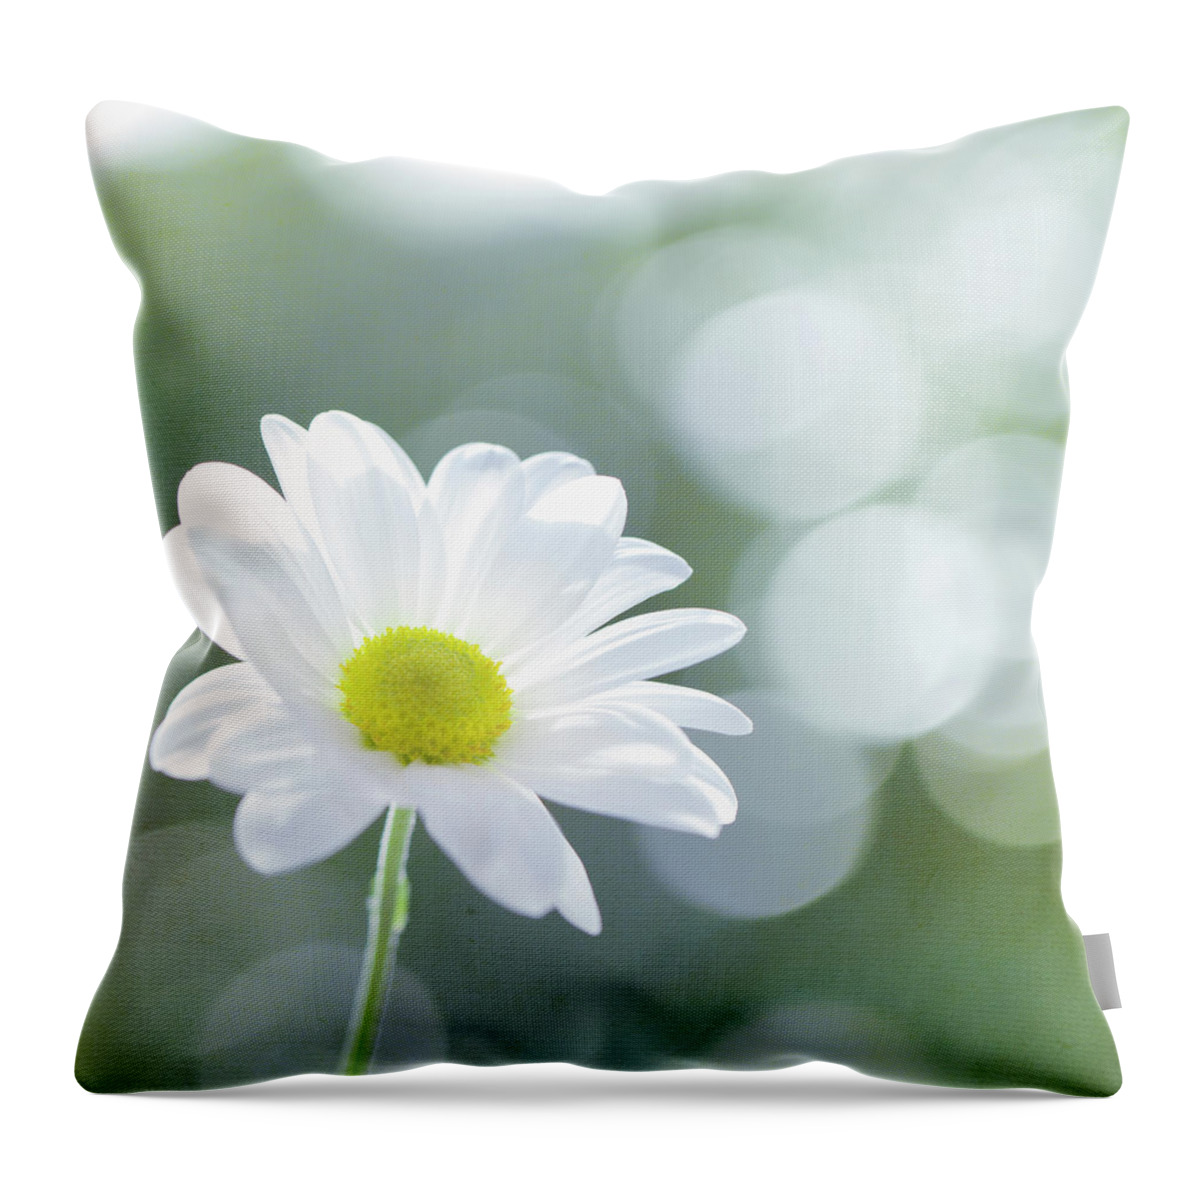 Chrysanthemum Throw Pillow featuring the photograph Single Chrysanthemum by Peter Chadwick Lrps